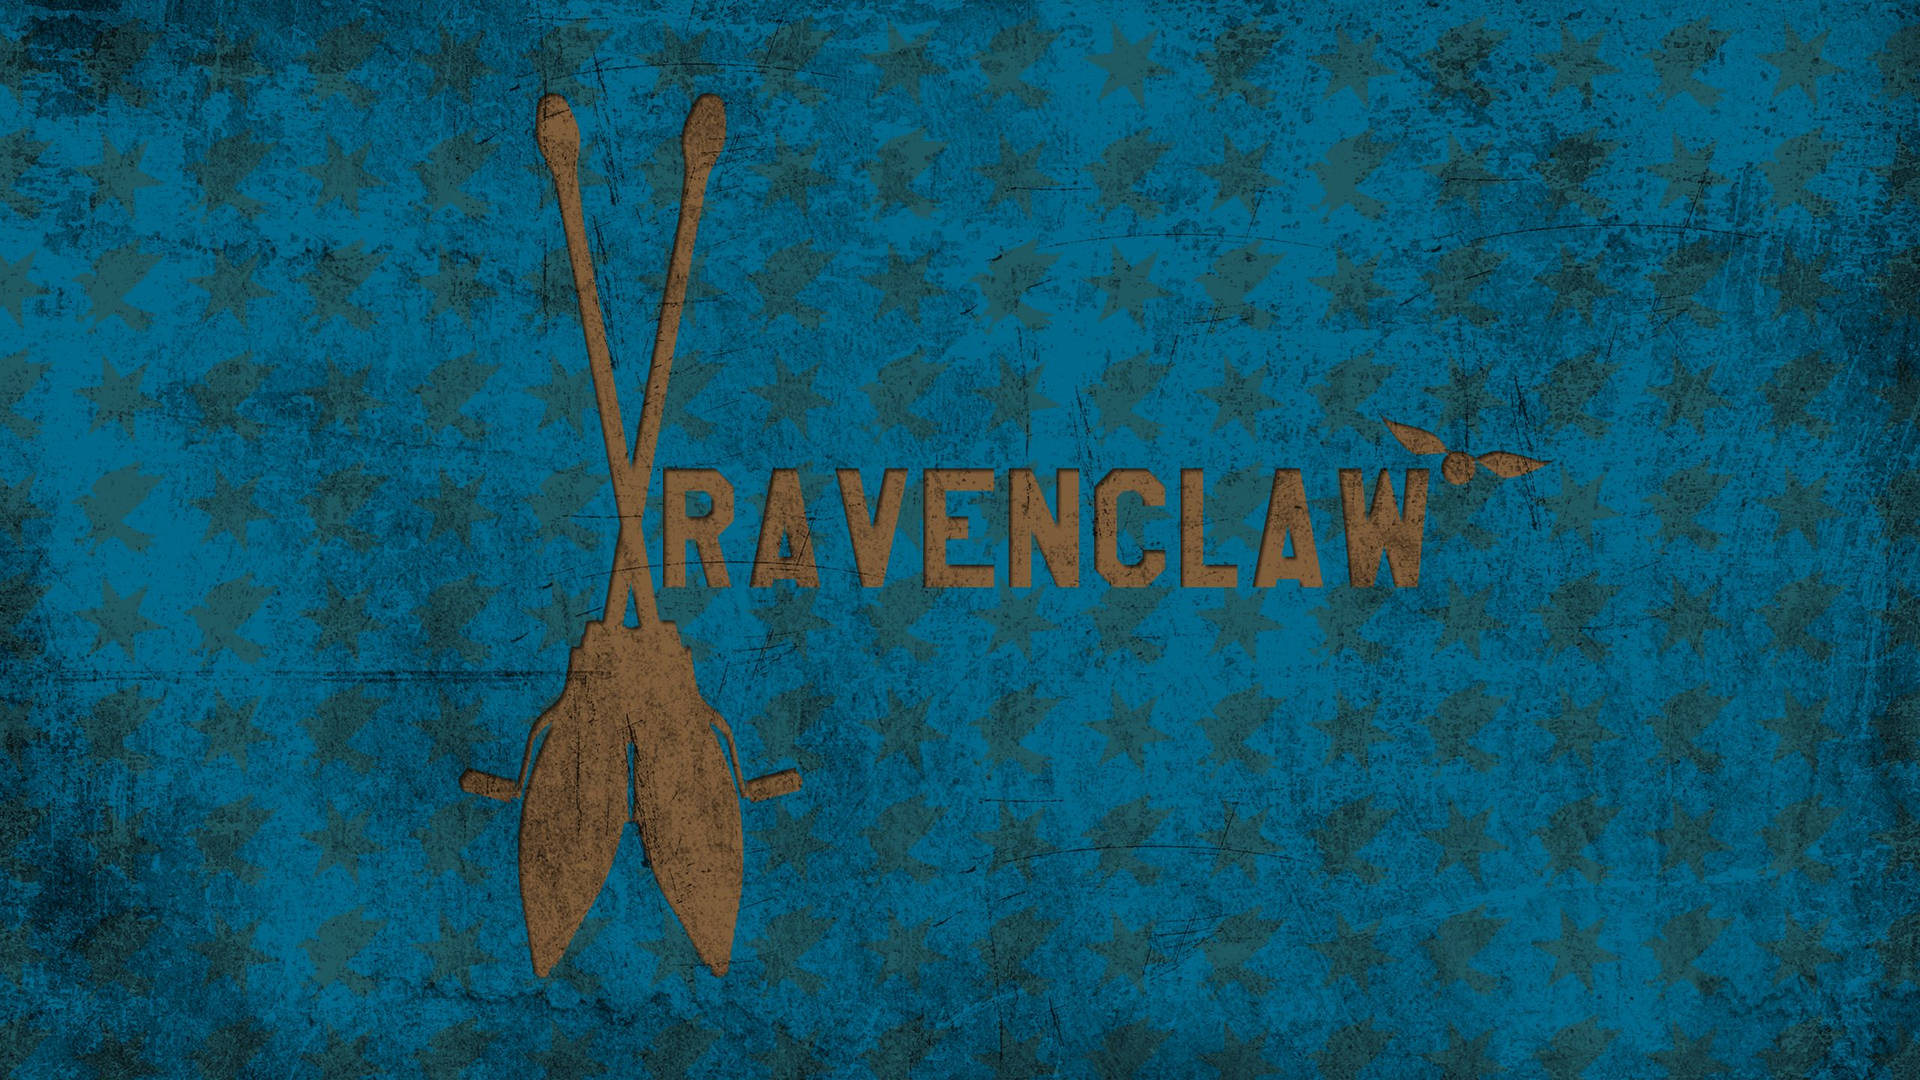 Harry Potter Houses Ravenclaw Quidditch Wallpaper